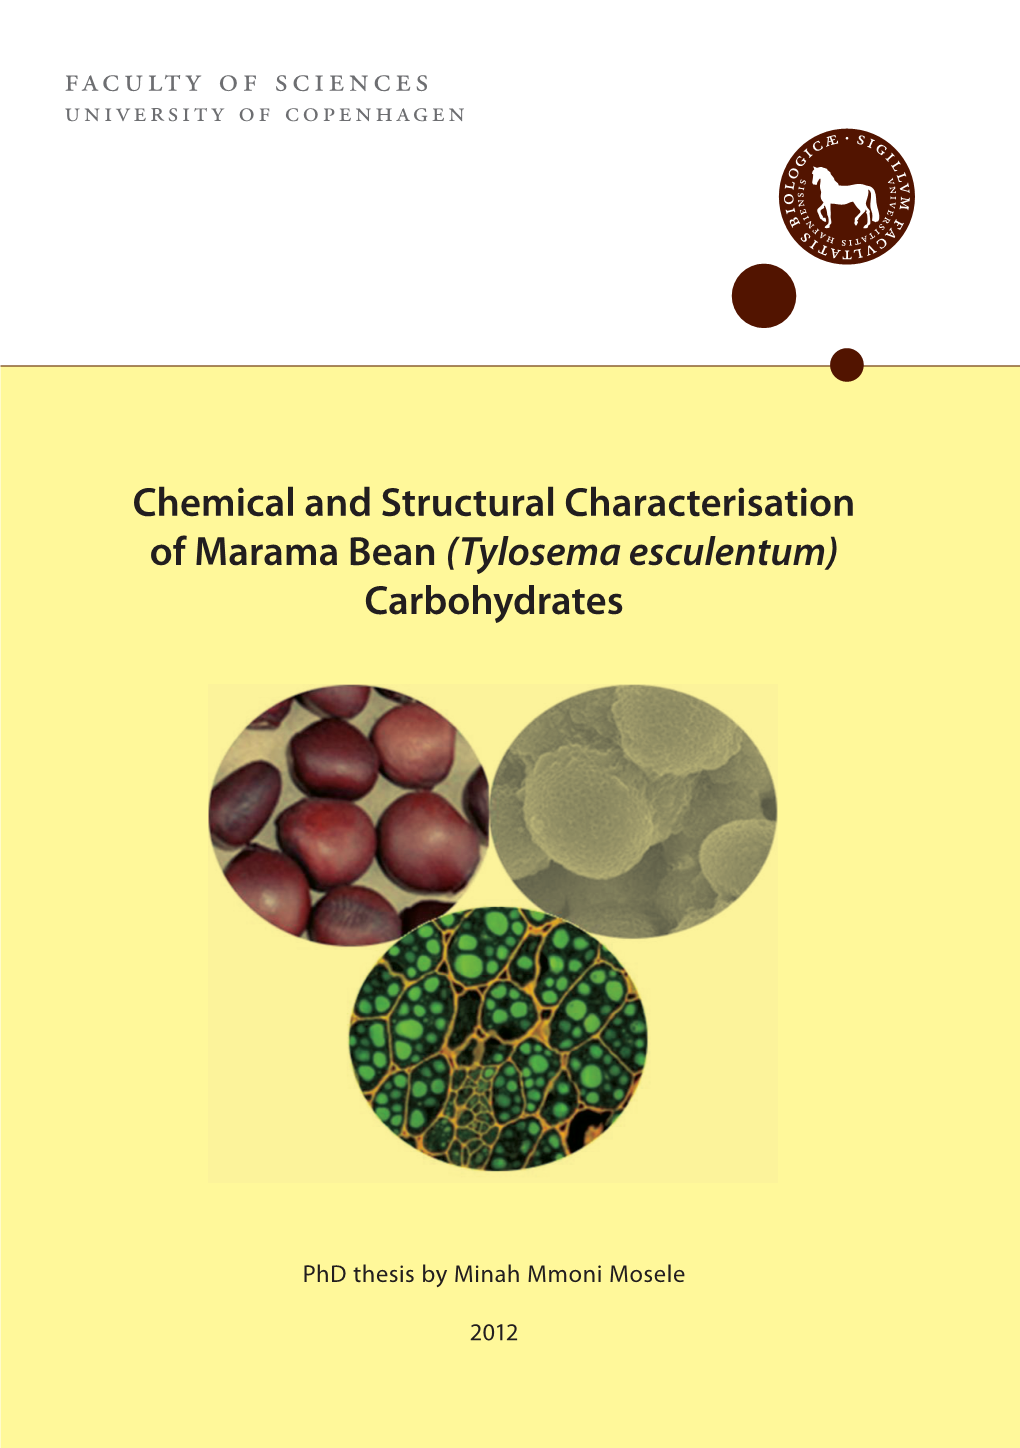 Chemical and Structural Characterisation of Marama Bean (Tylosema Esculentum) Carbohydrates